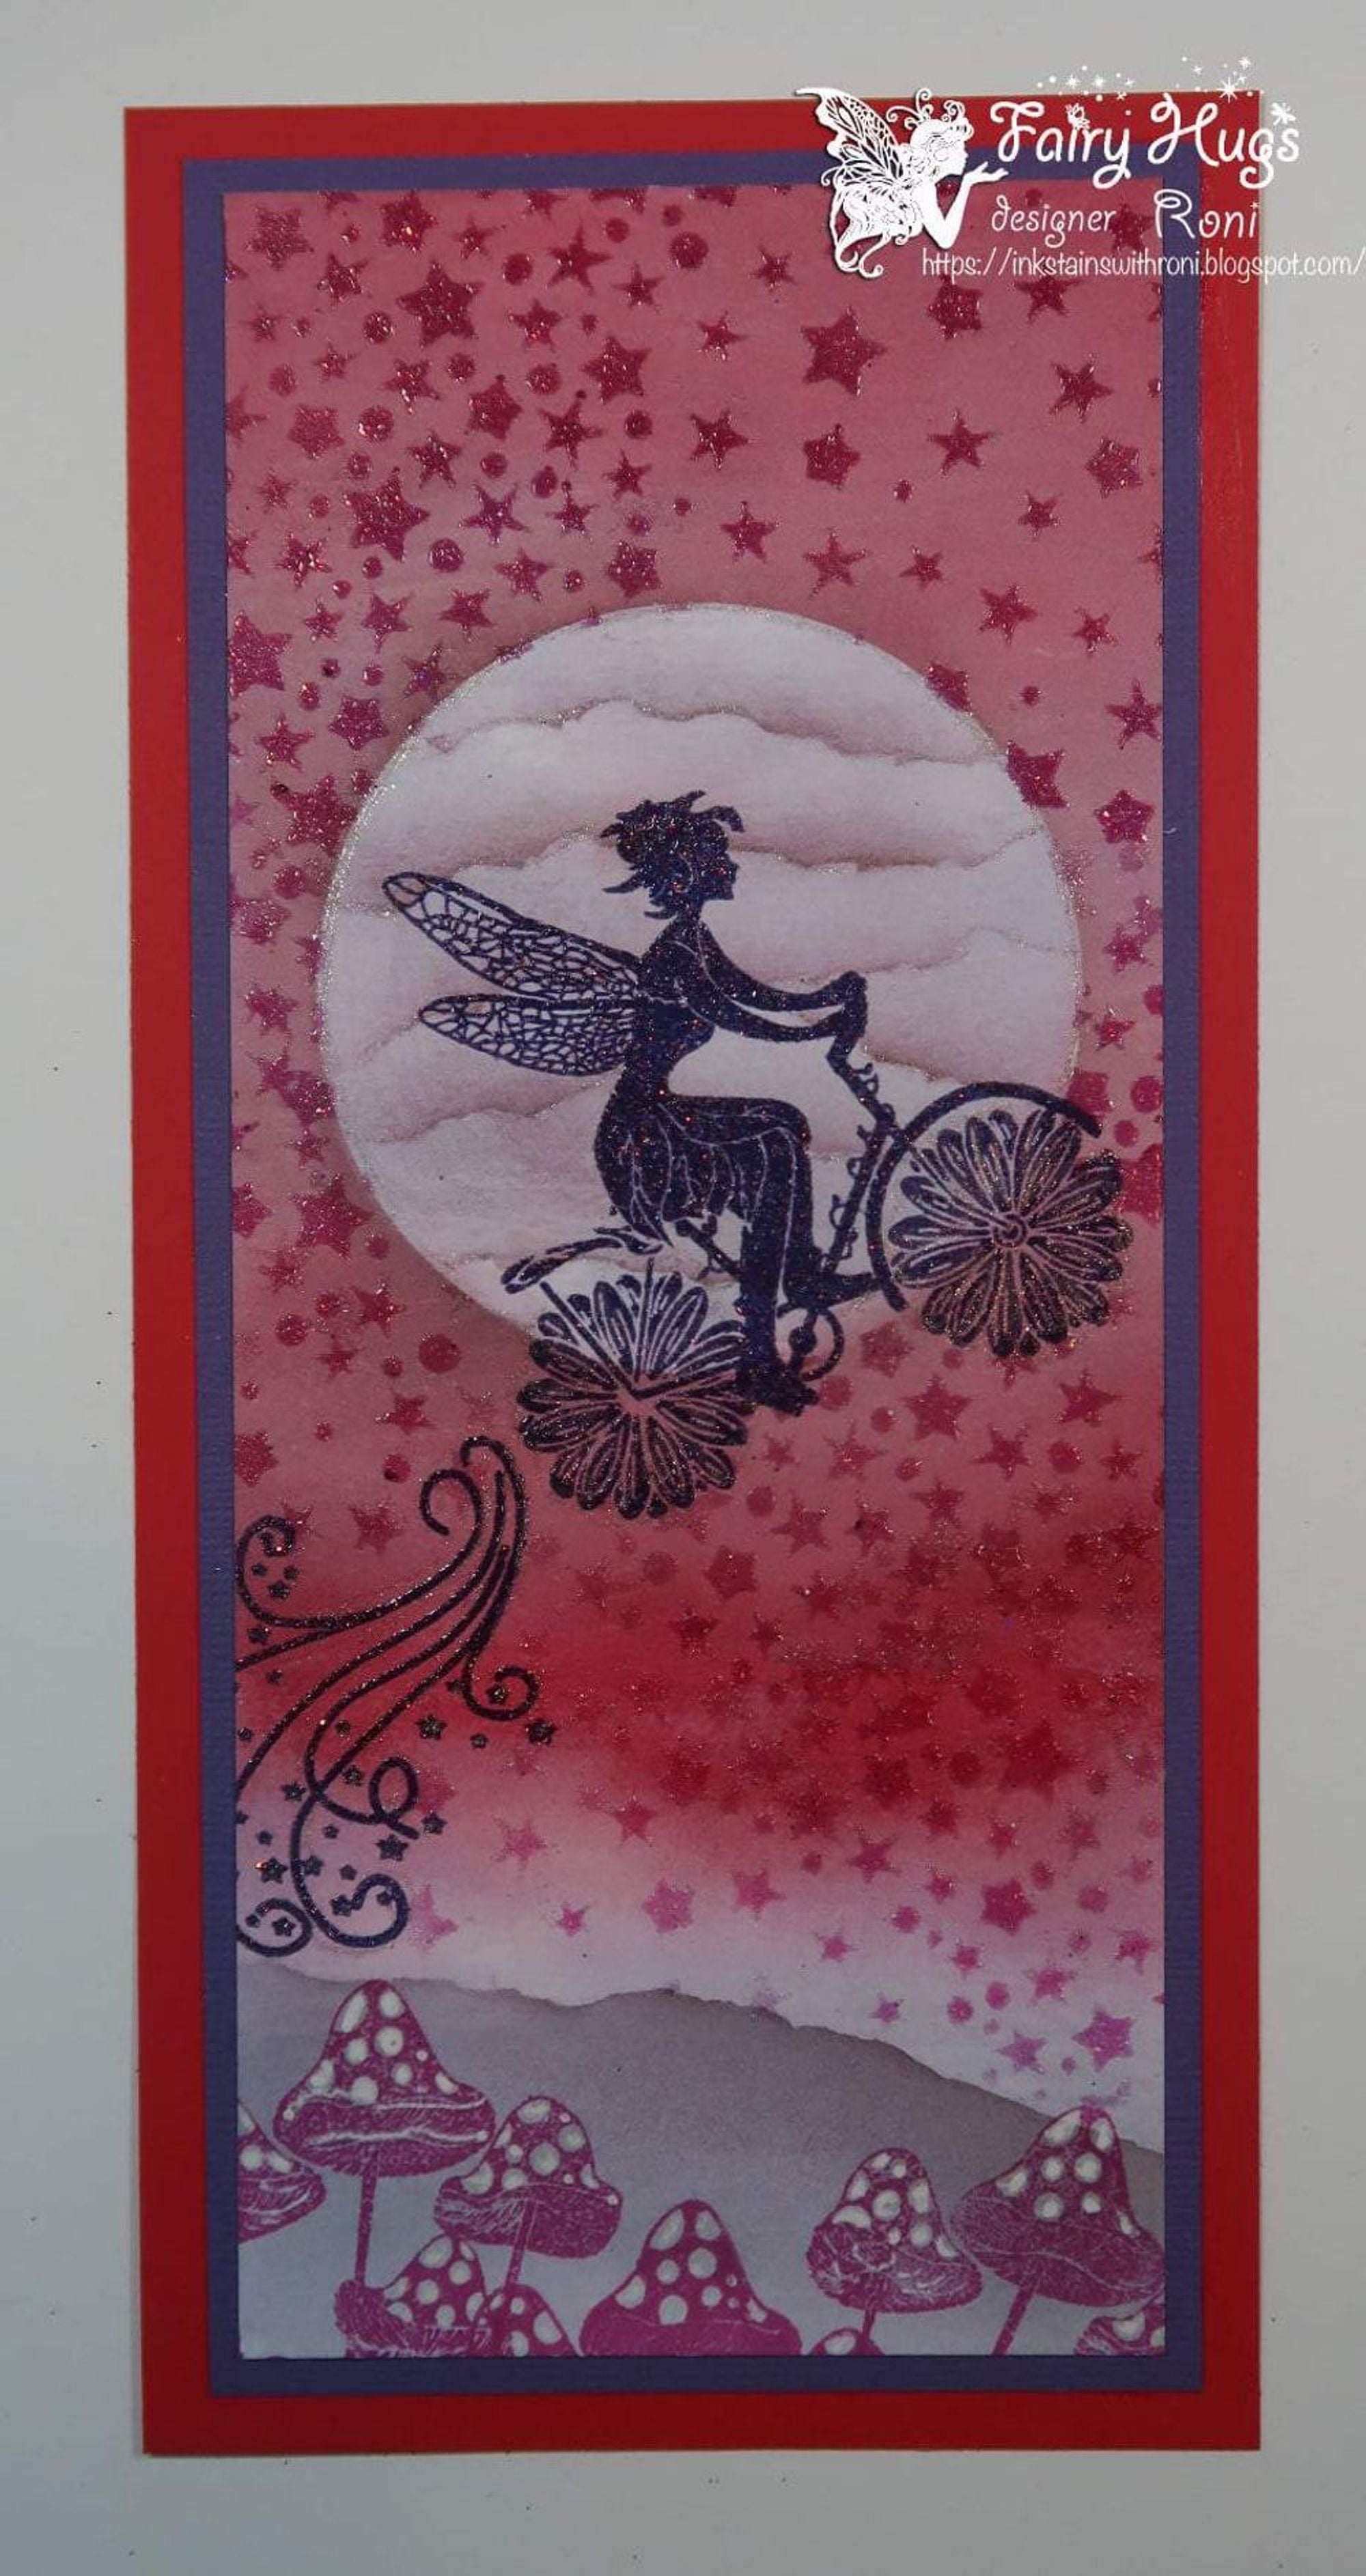 Fairy Hugs Stamps - Dotted Mushrooms